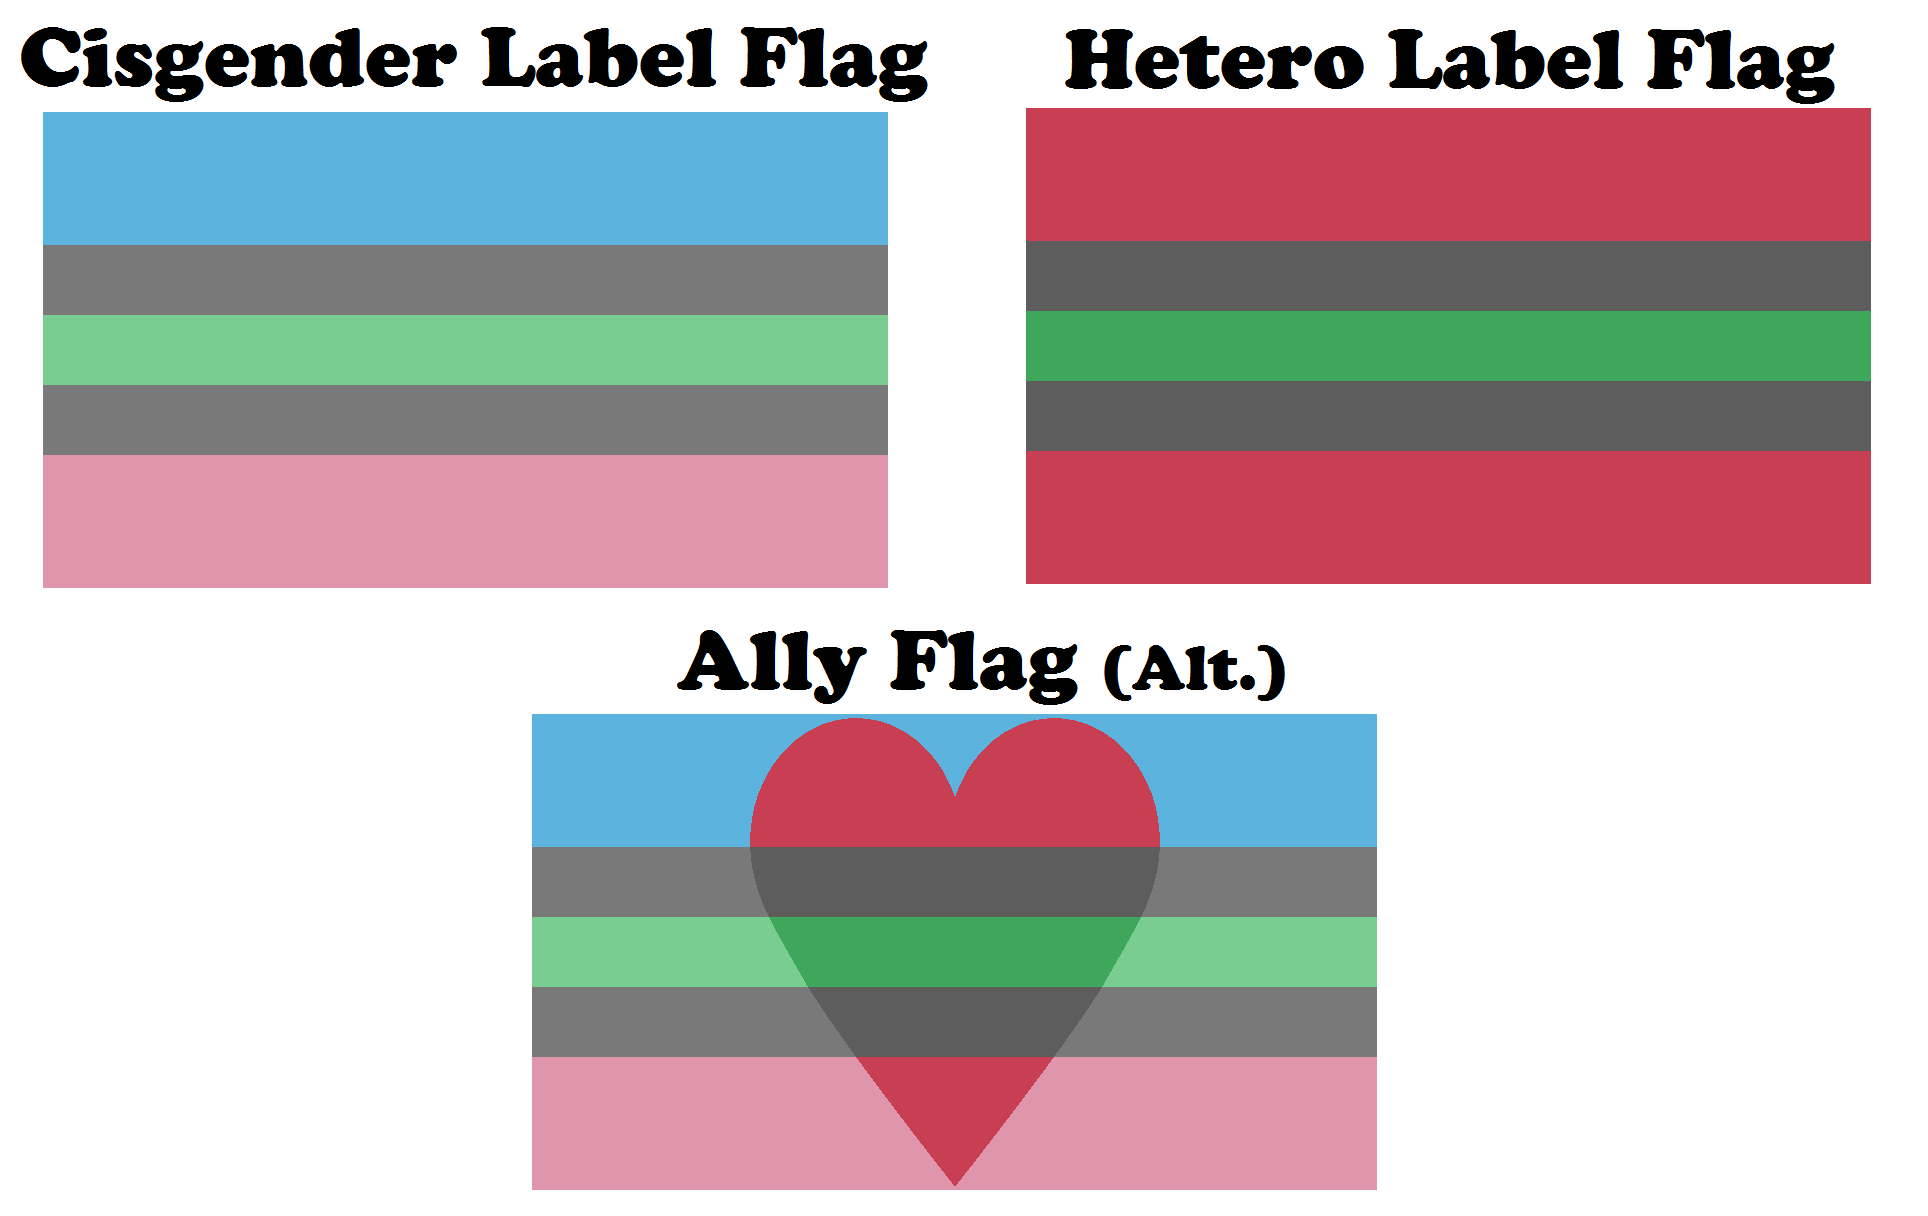 Queer-Friendly Cisgender and Hetero Flags by Chao0071 on DeviantArt